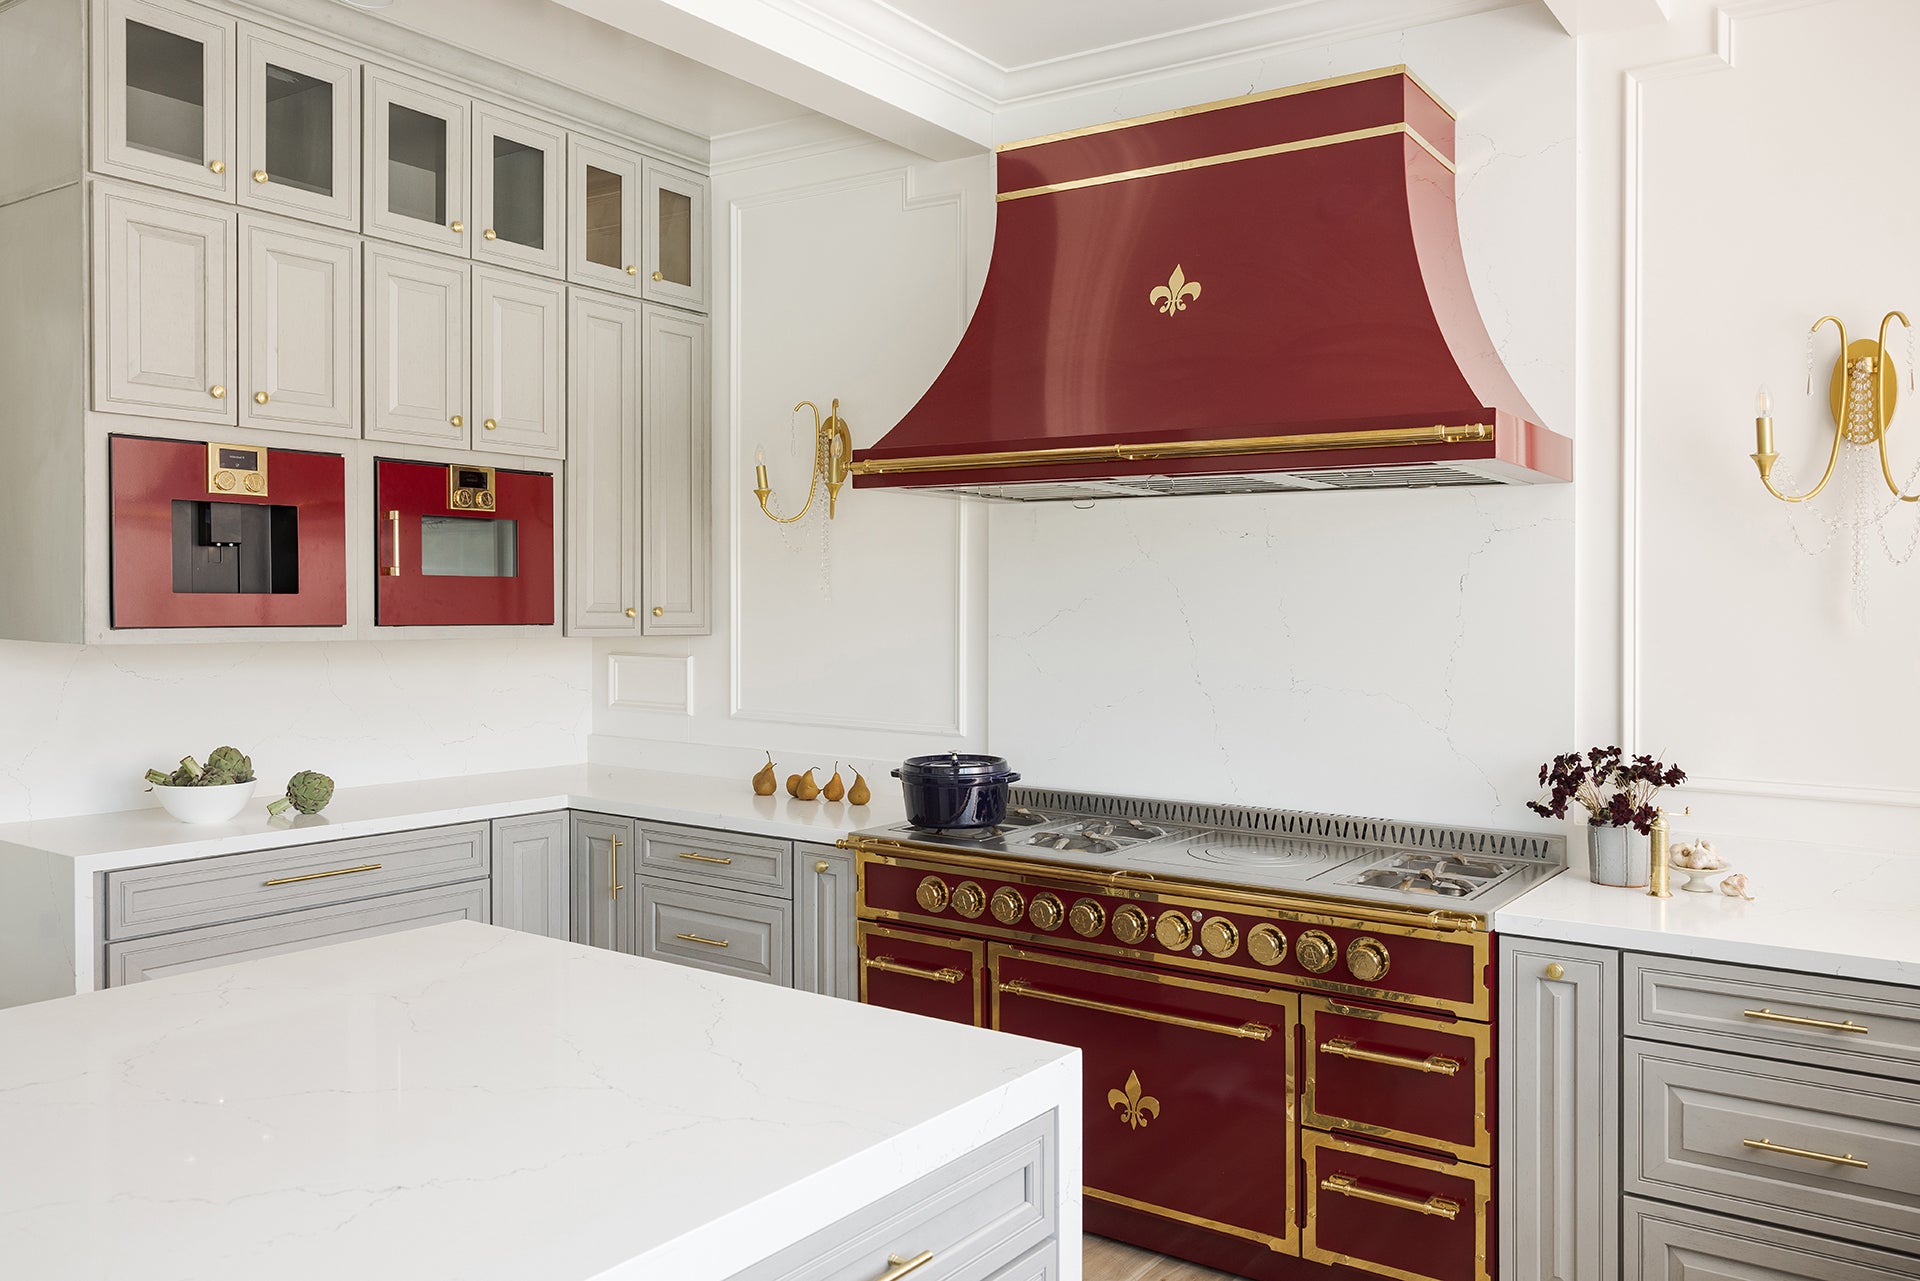 Kitchen remodeling with custom kitchen ranges with inbuilt and hanging kitchen cabinets and red luxury kitchen hood above French stove 